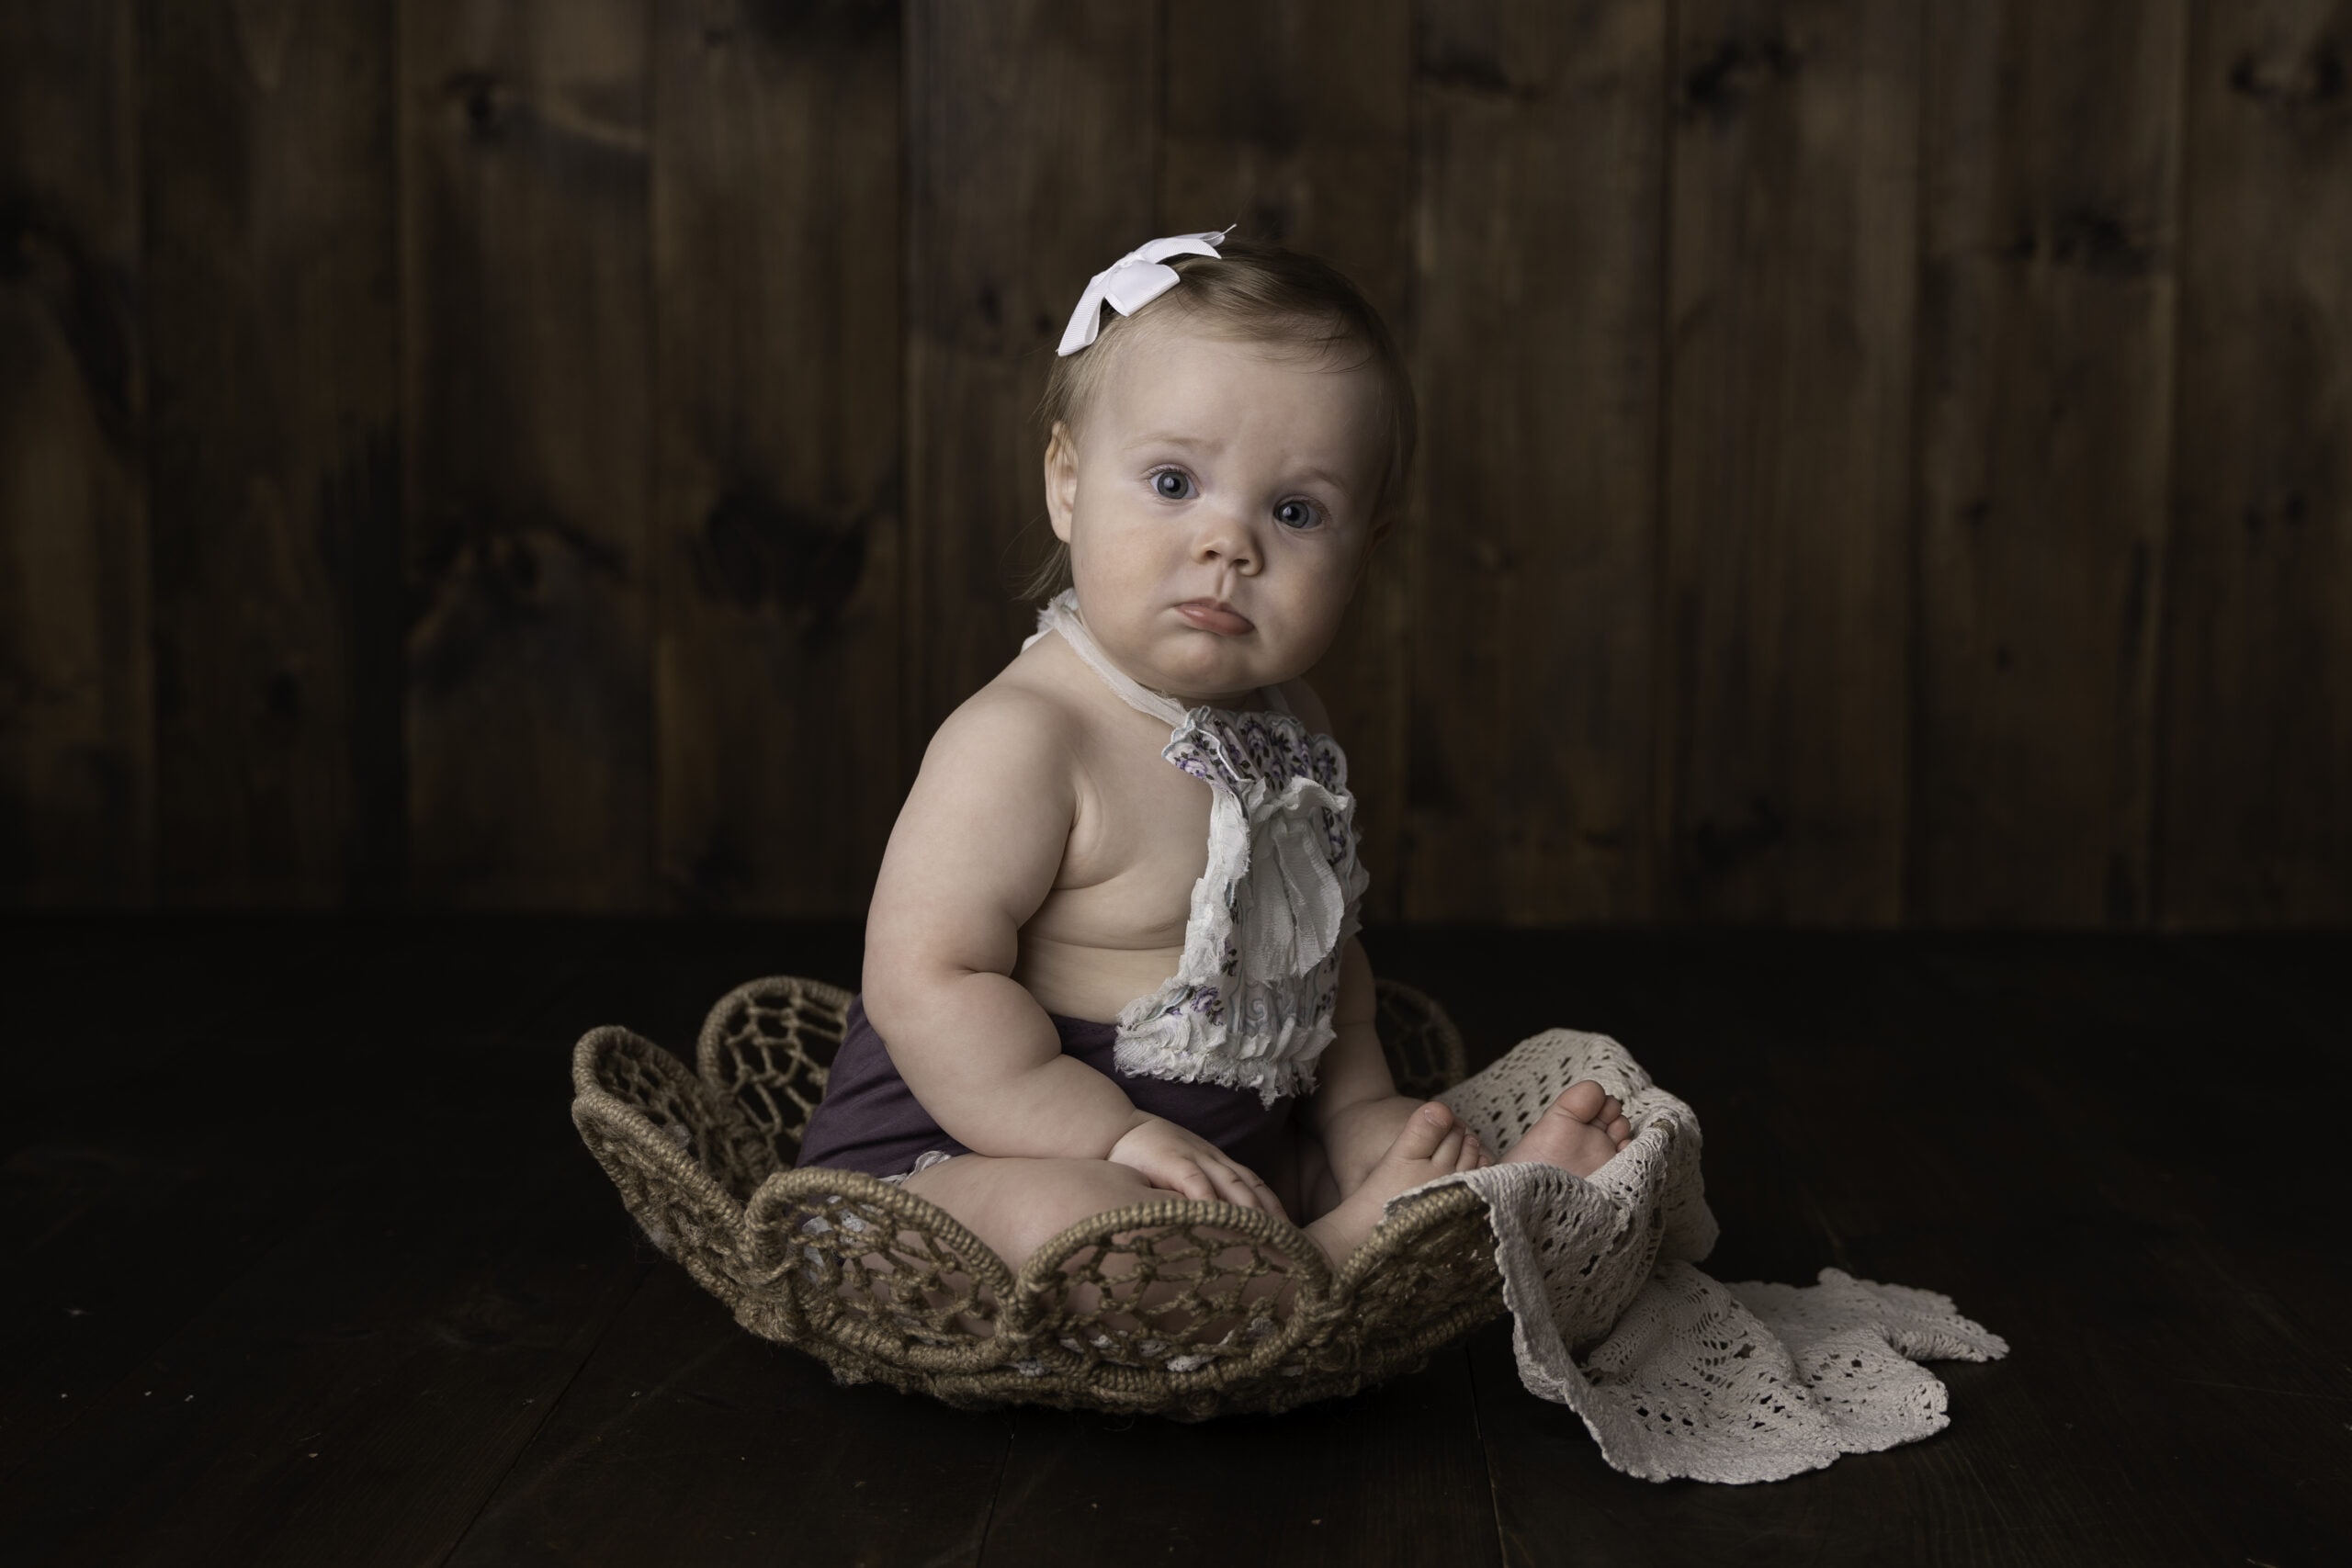 Dark Image, a baby girl sits up in a small wicker basket